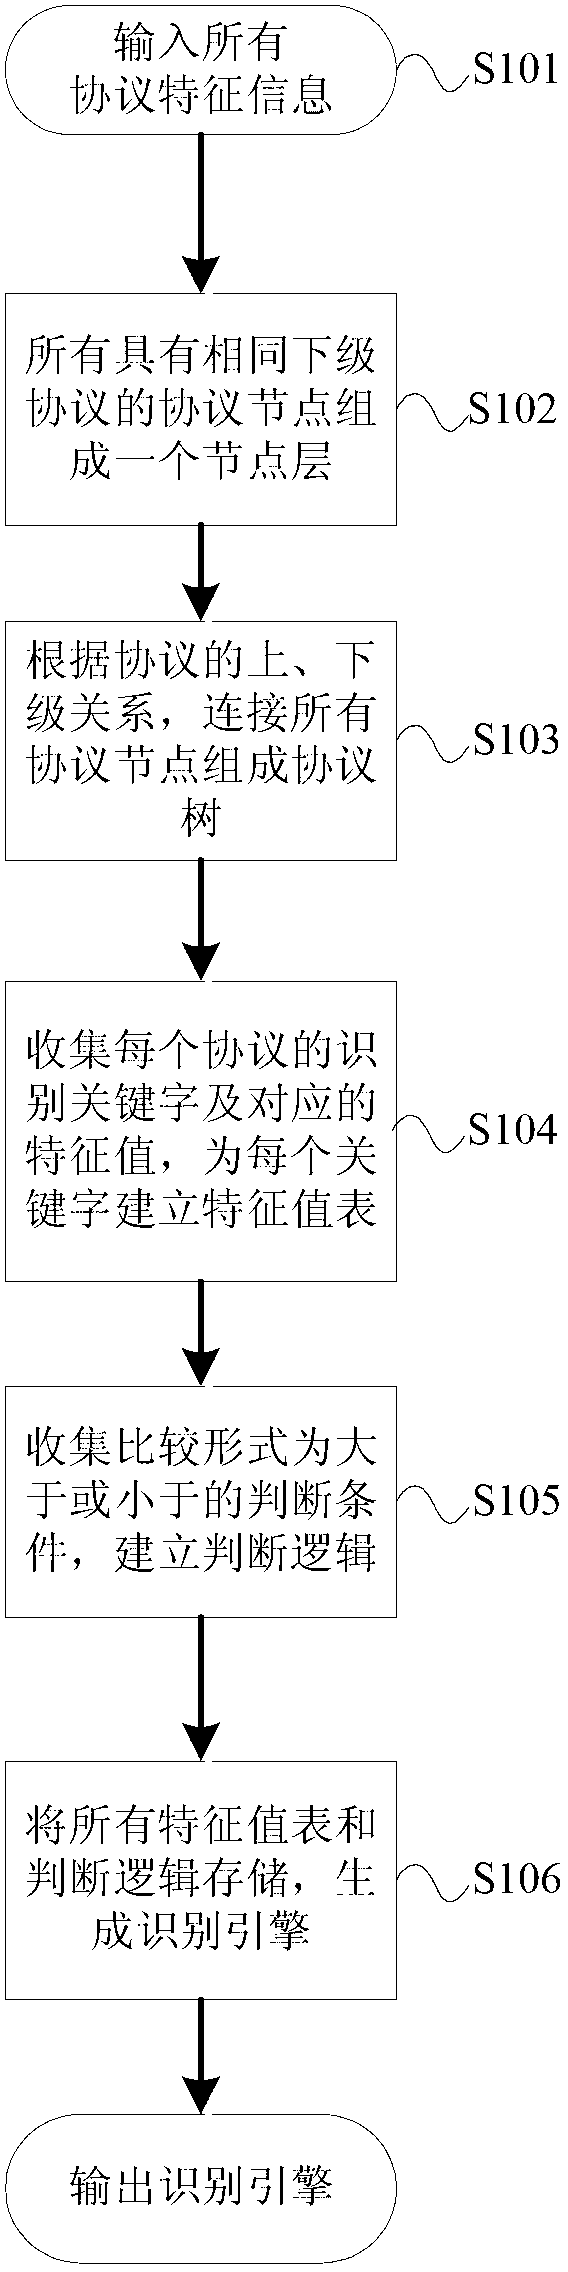 Network packet protocol identification method and system